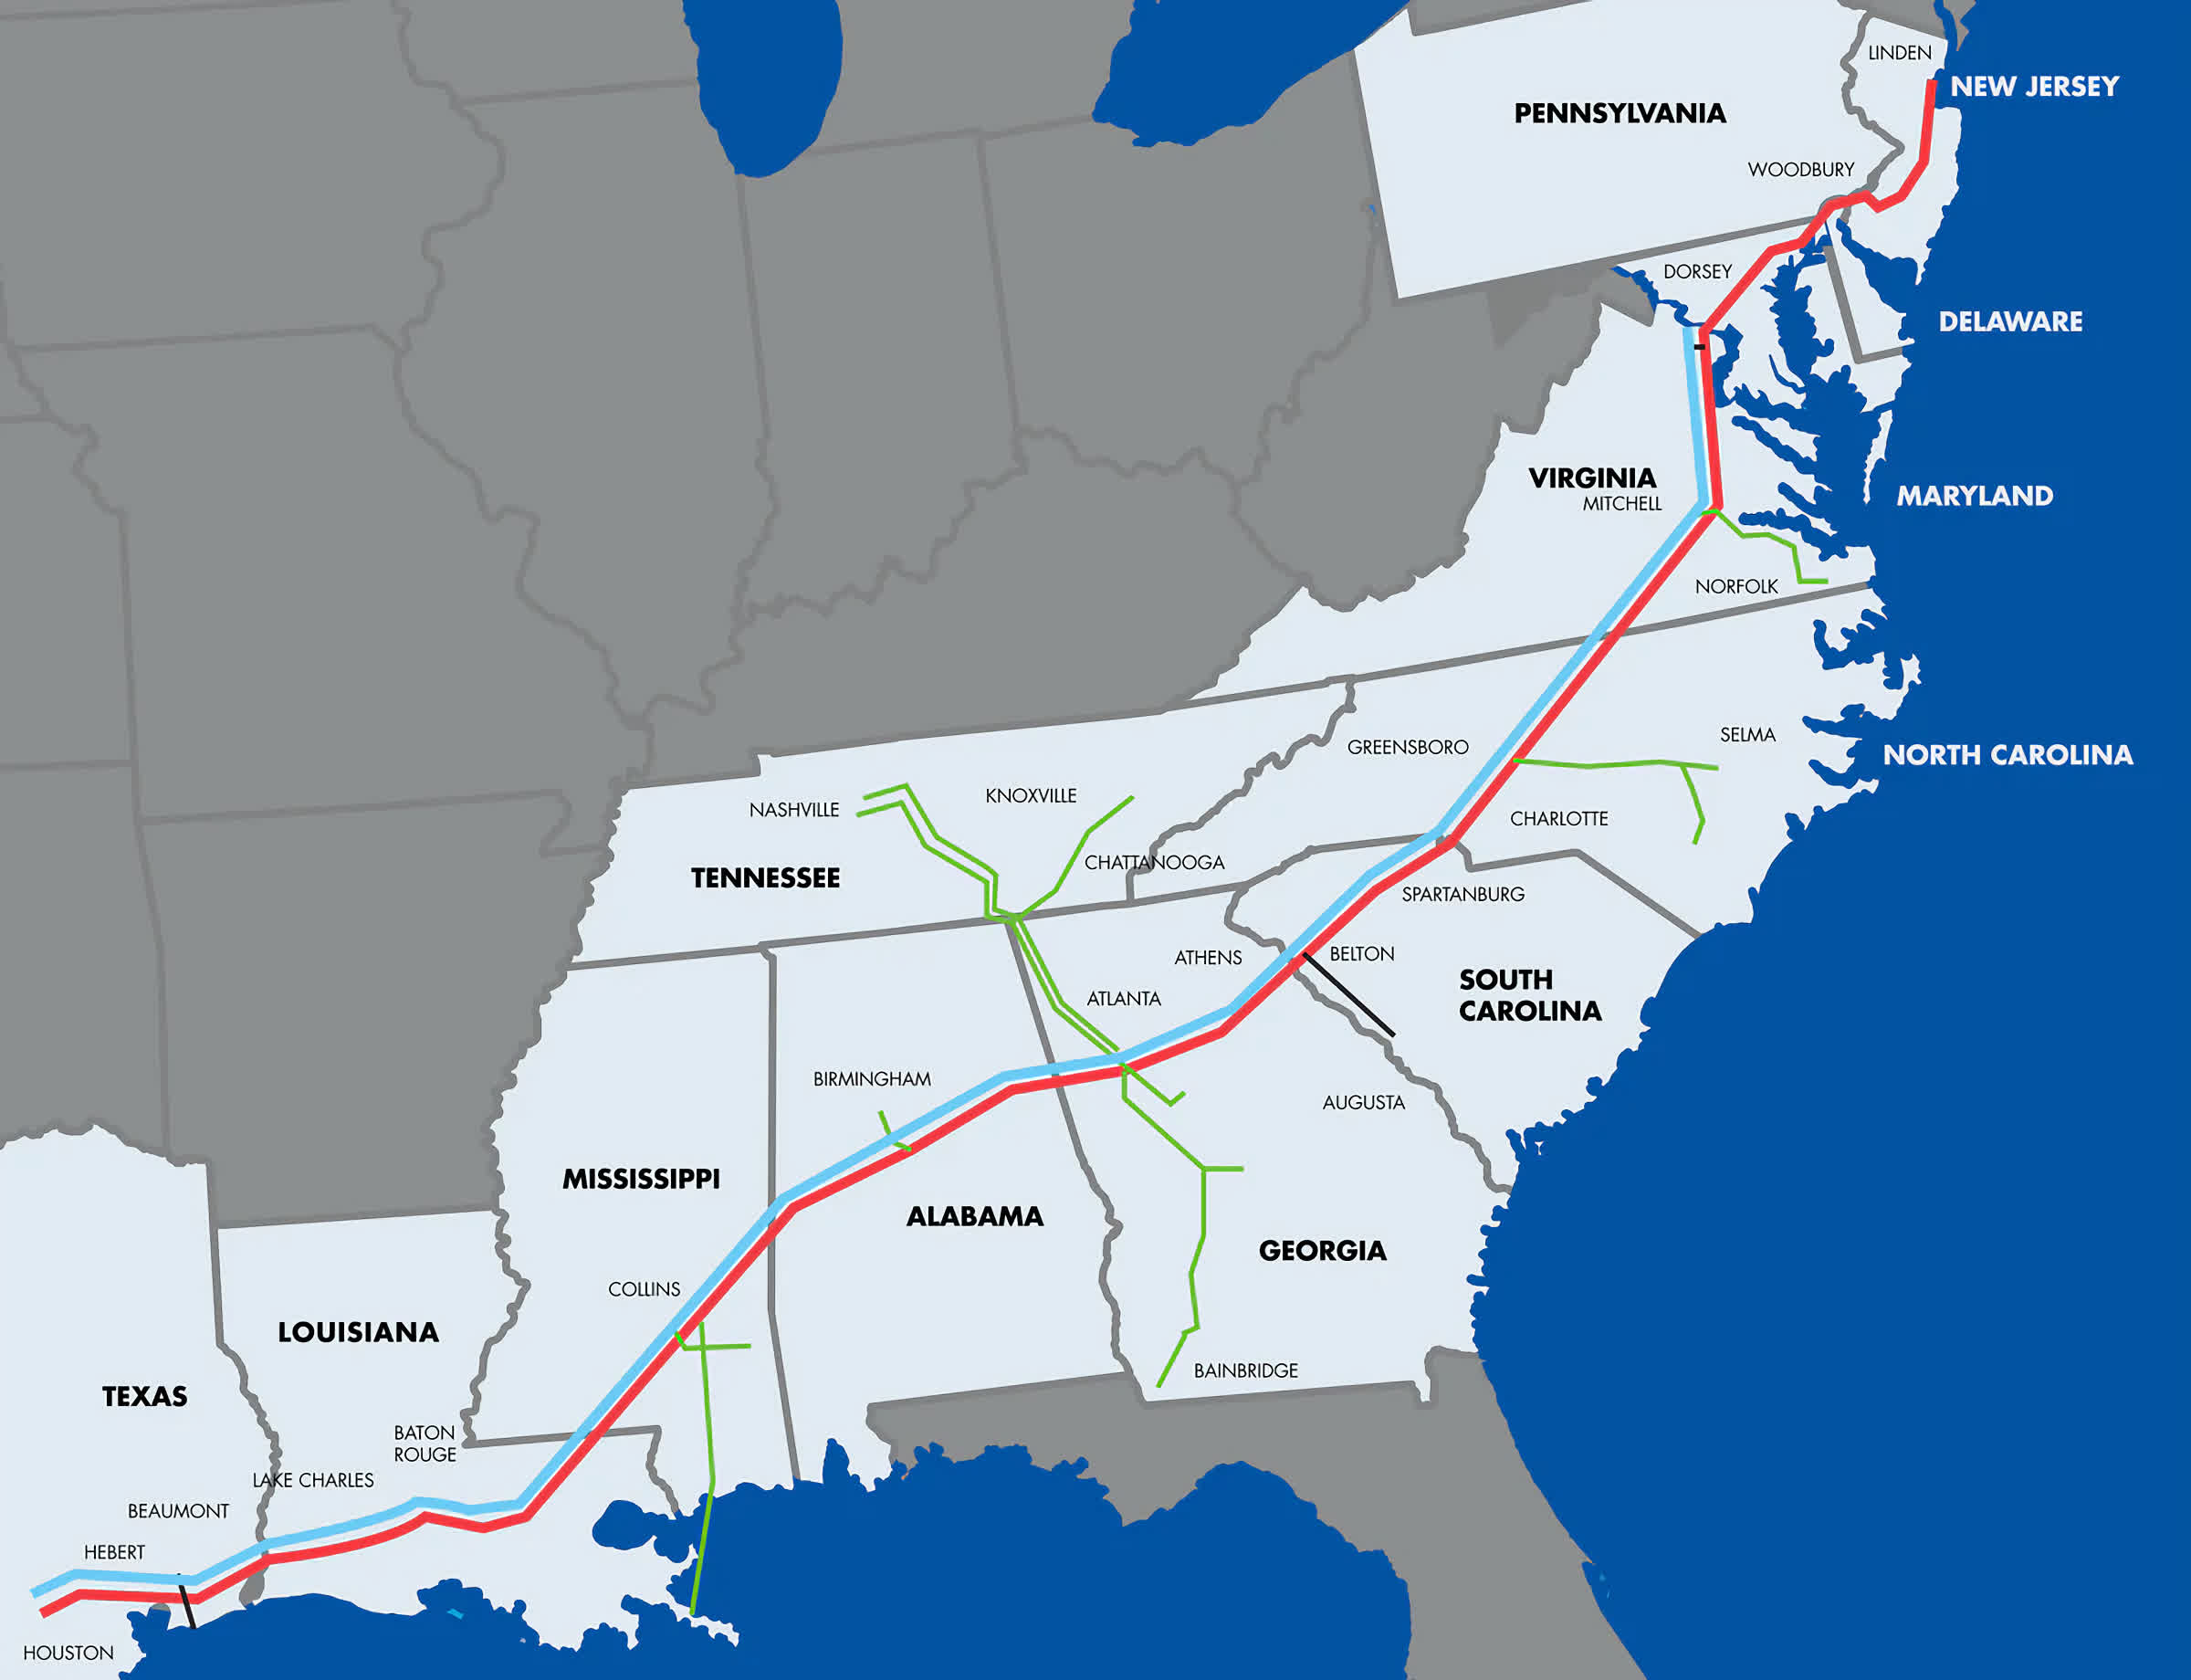 The government is offering $10 million for information on Colonial Pipeline hackers DarkSide